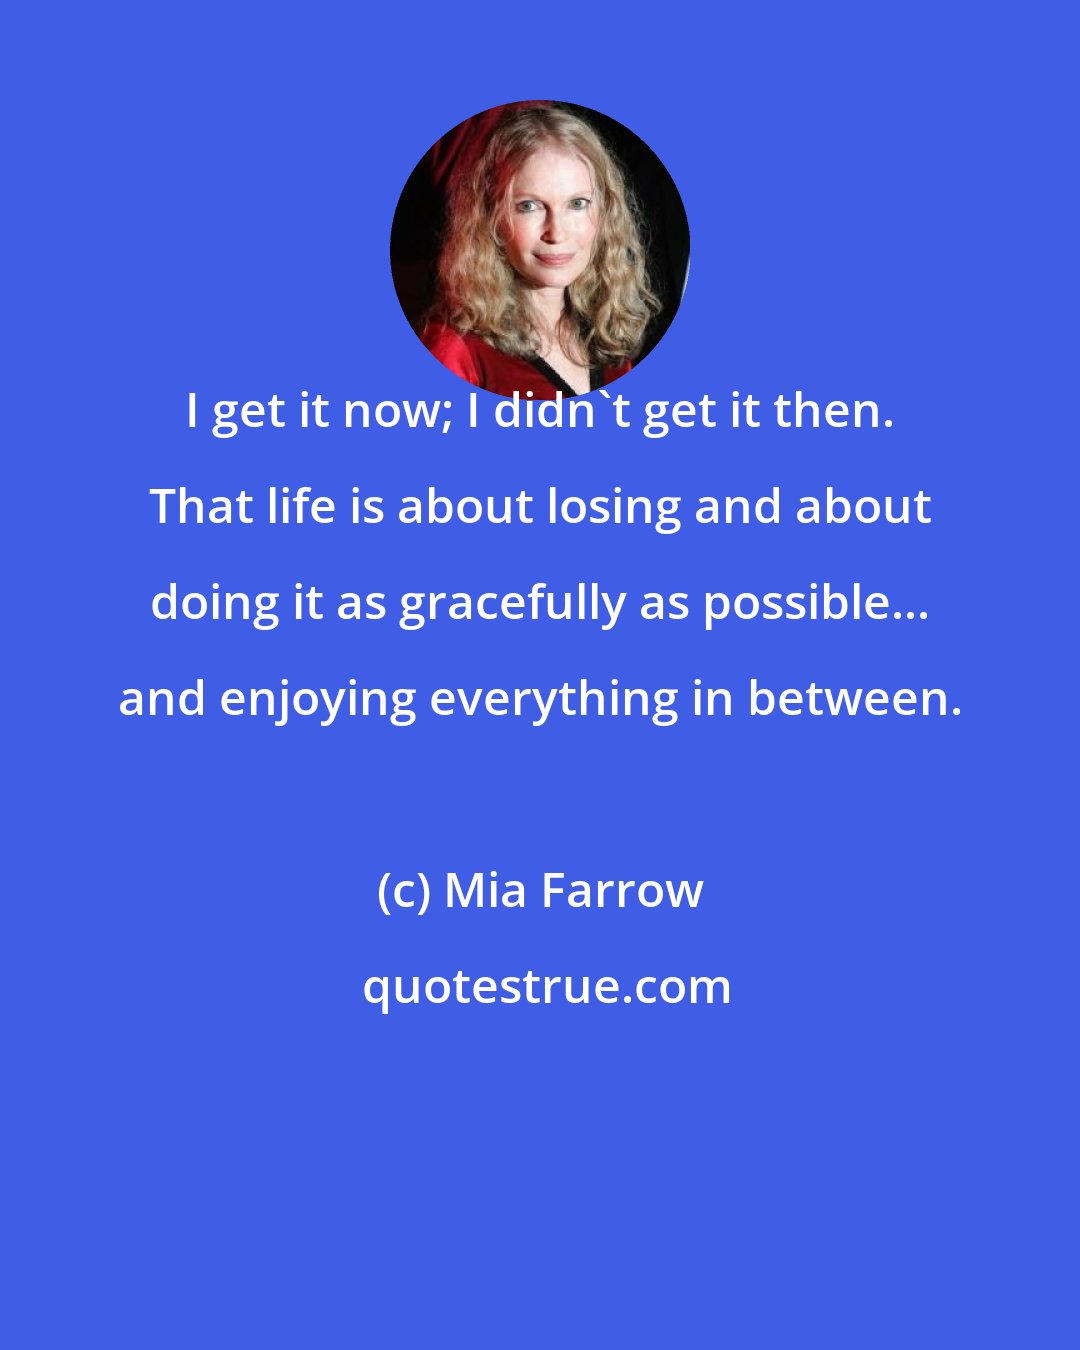 Mia Farrow: I get it now; I didn't get it then. That life is about losing and about doing it as gracefully as possible... and enjoying everything in between.